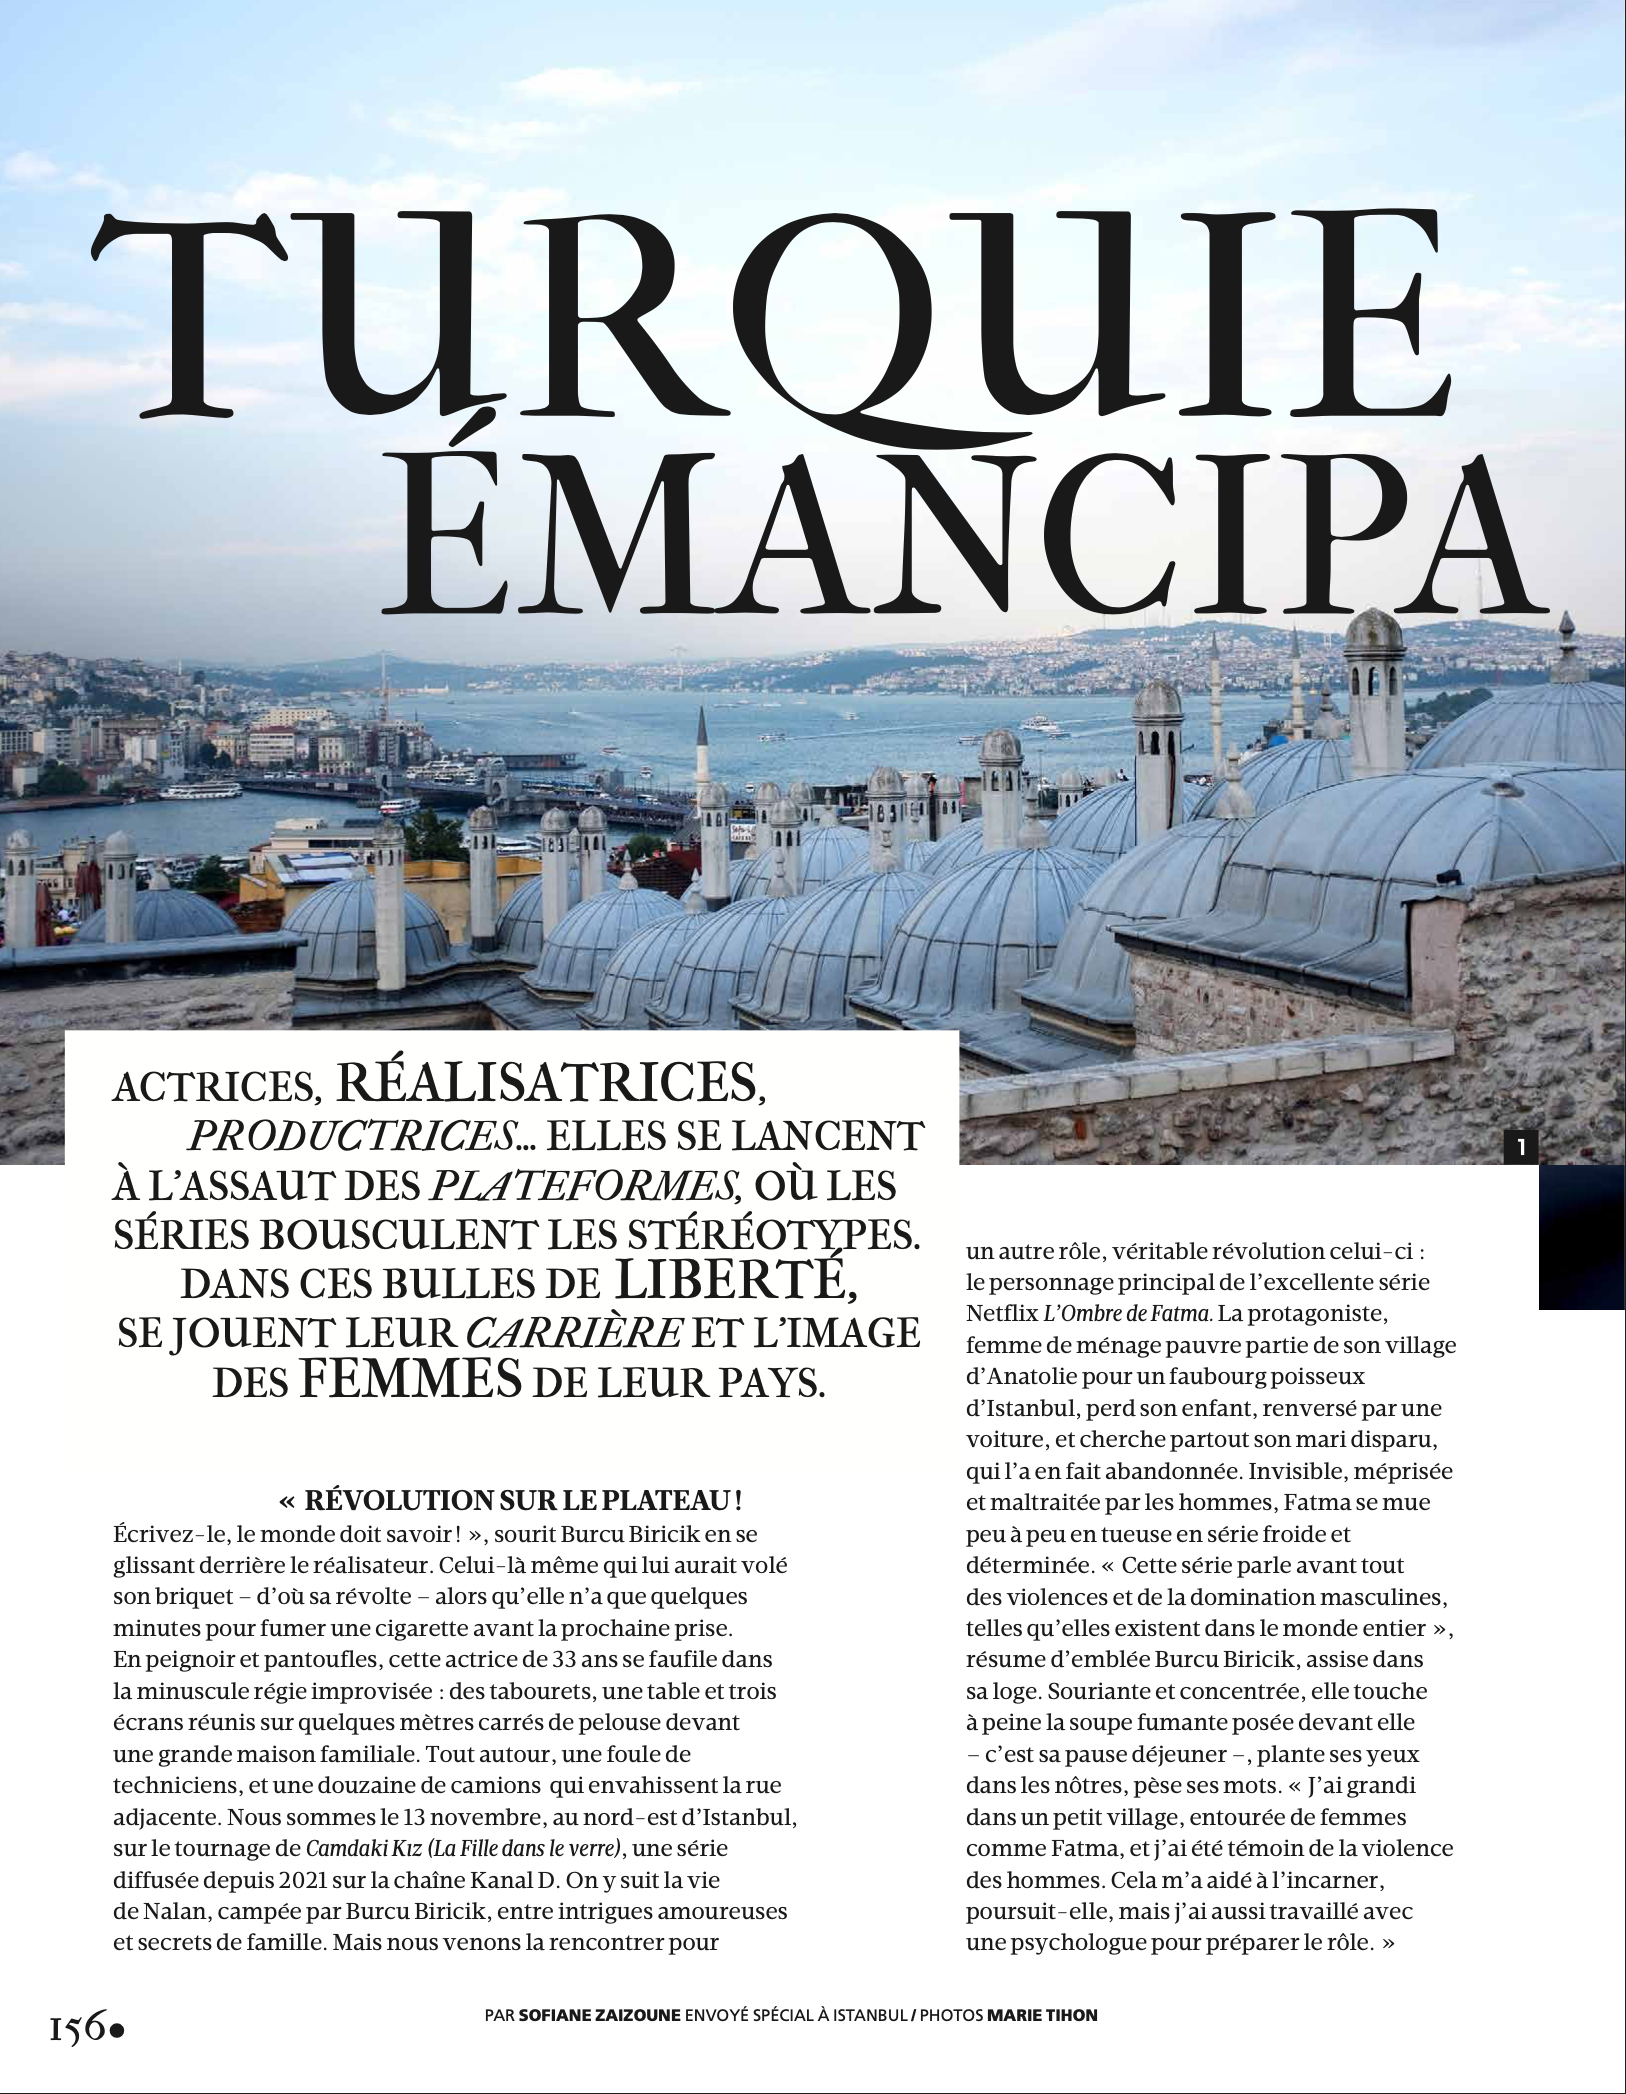 Image from Publications - Madame Figaro - 6 pages